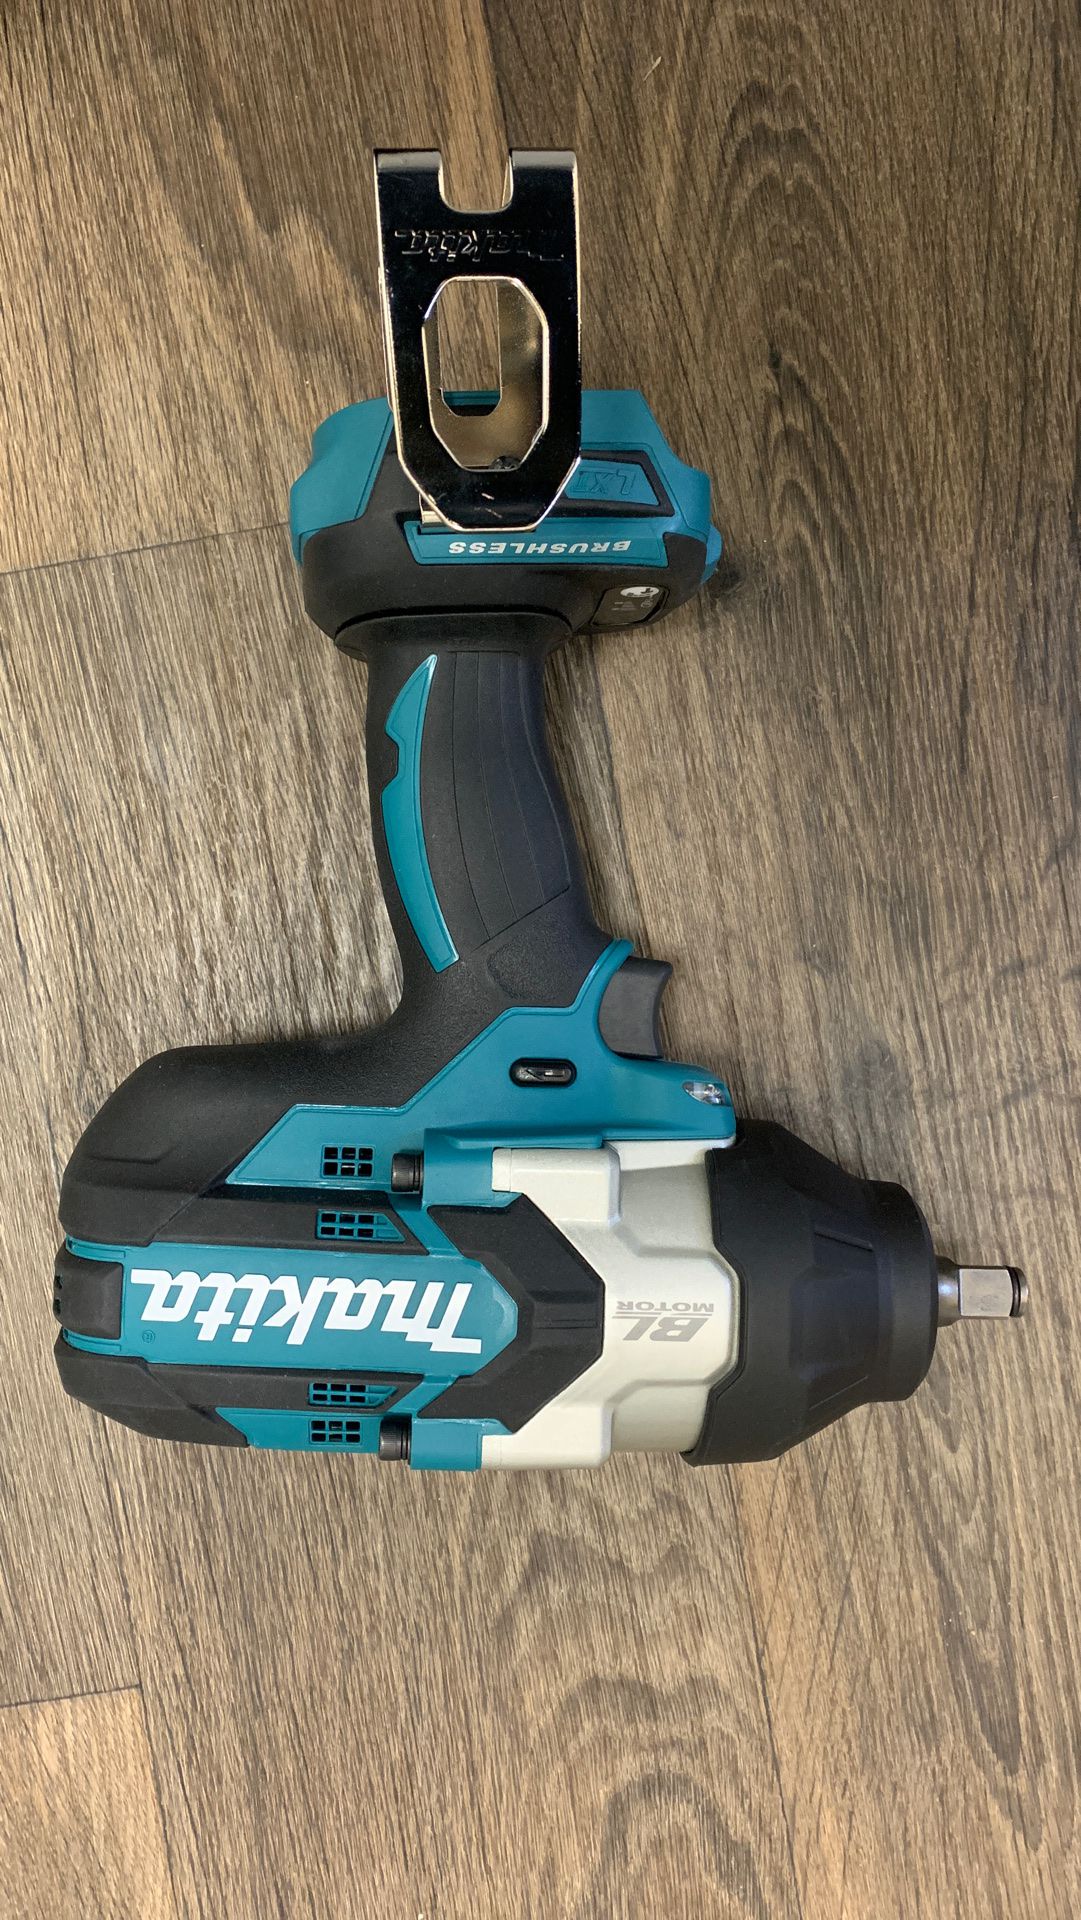 Makitta impact wrench 18V brushless motor model XWT08 TOOL ONLY IT DOES NOT INCLUDES BATTERY OR CHARGER $240